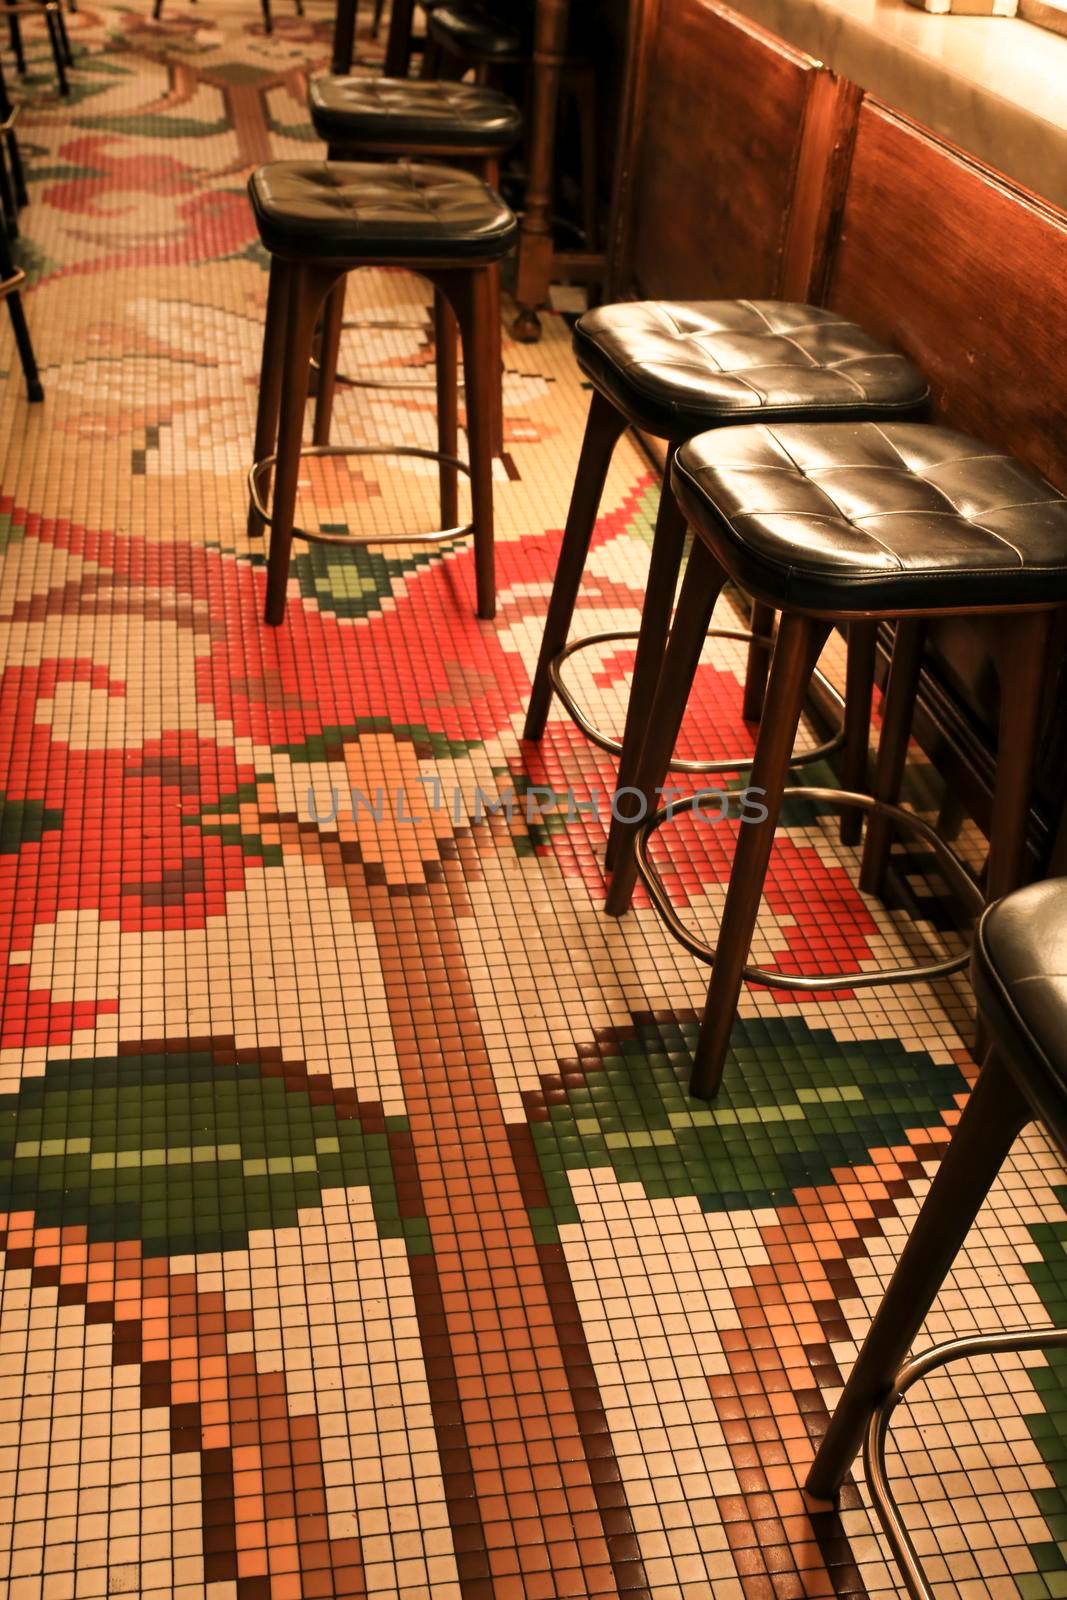 Luxurious restaurant in Alicante with beautiful mosaic floor by soniabonet